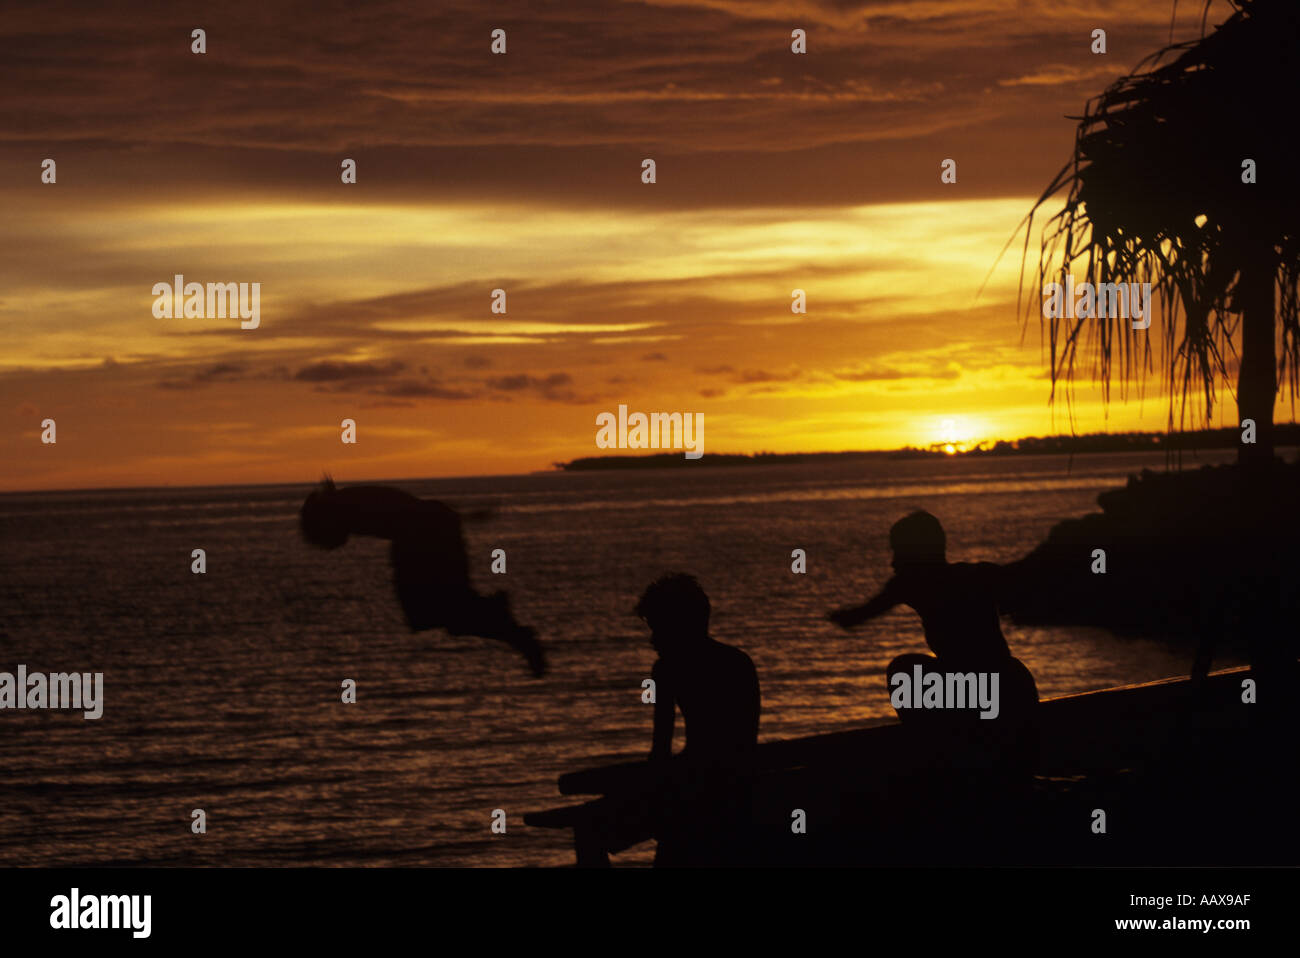 Kids playing sunset in the Marshall Islands Stock Photo